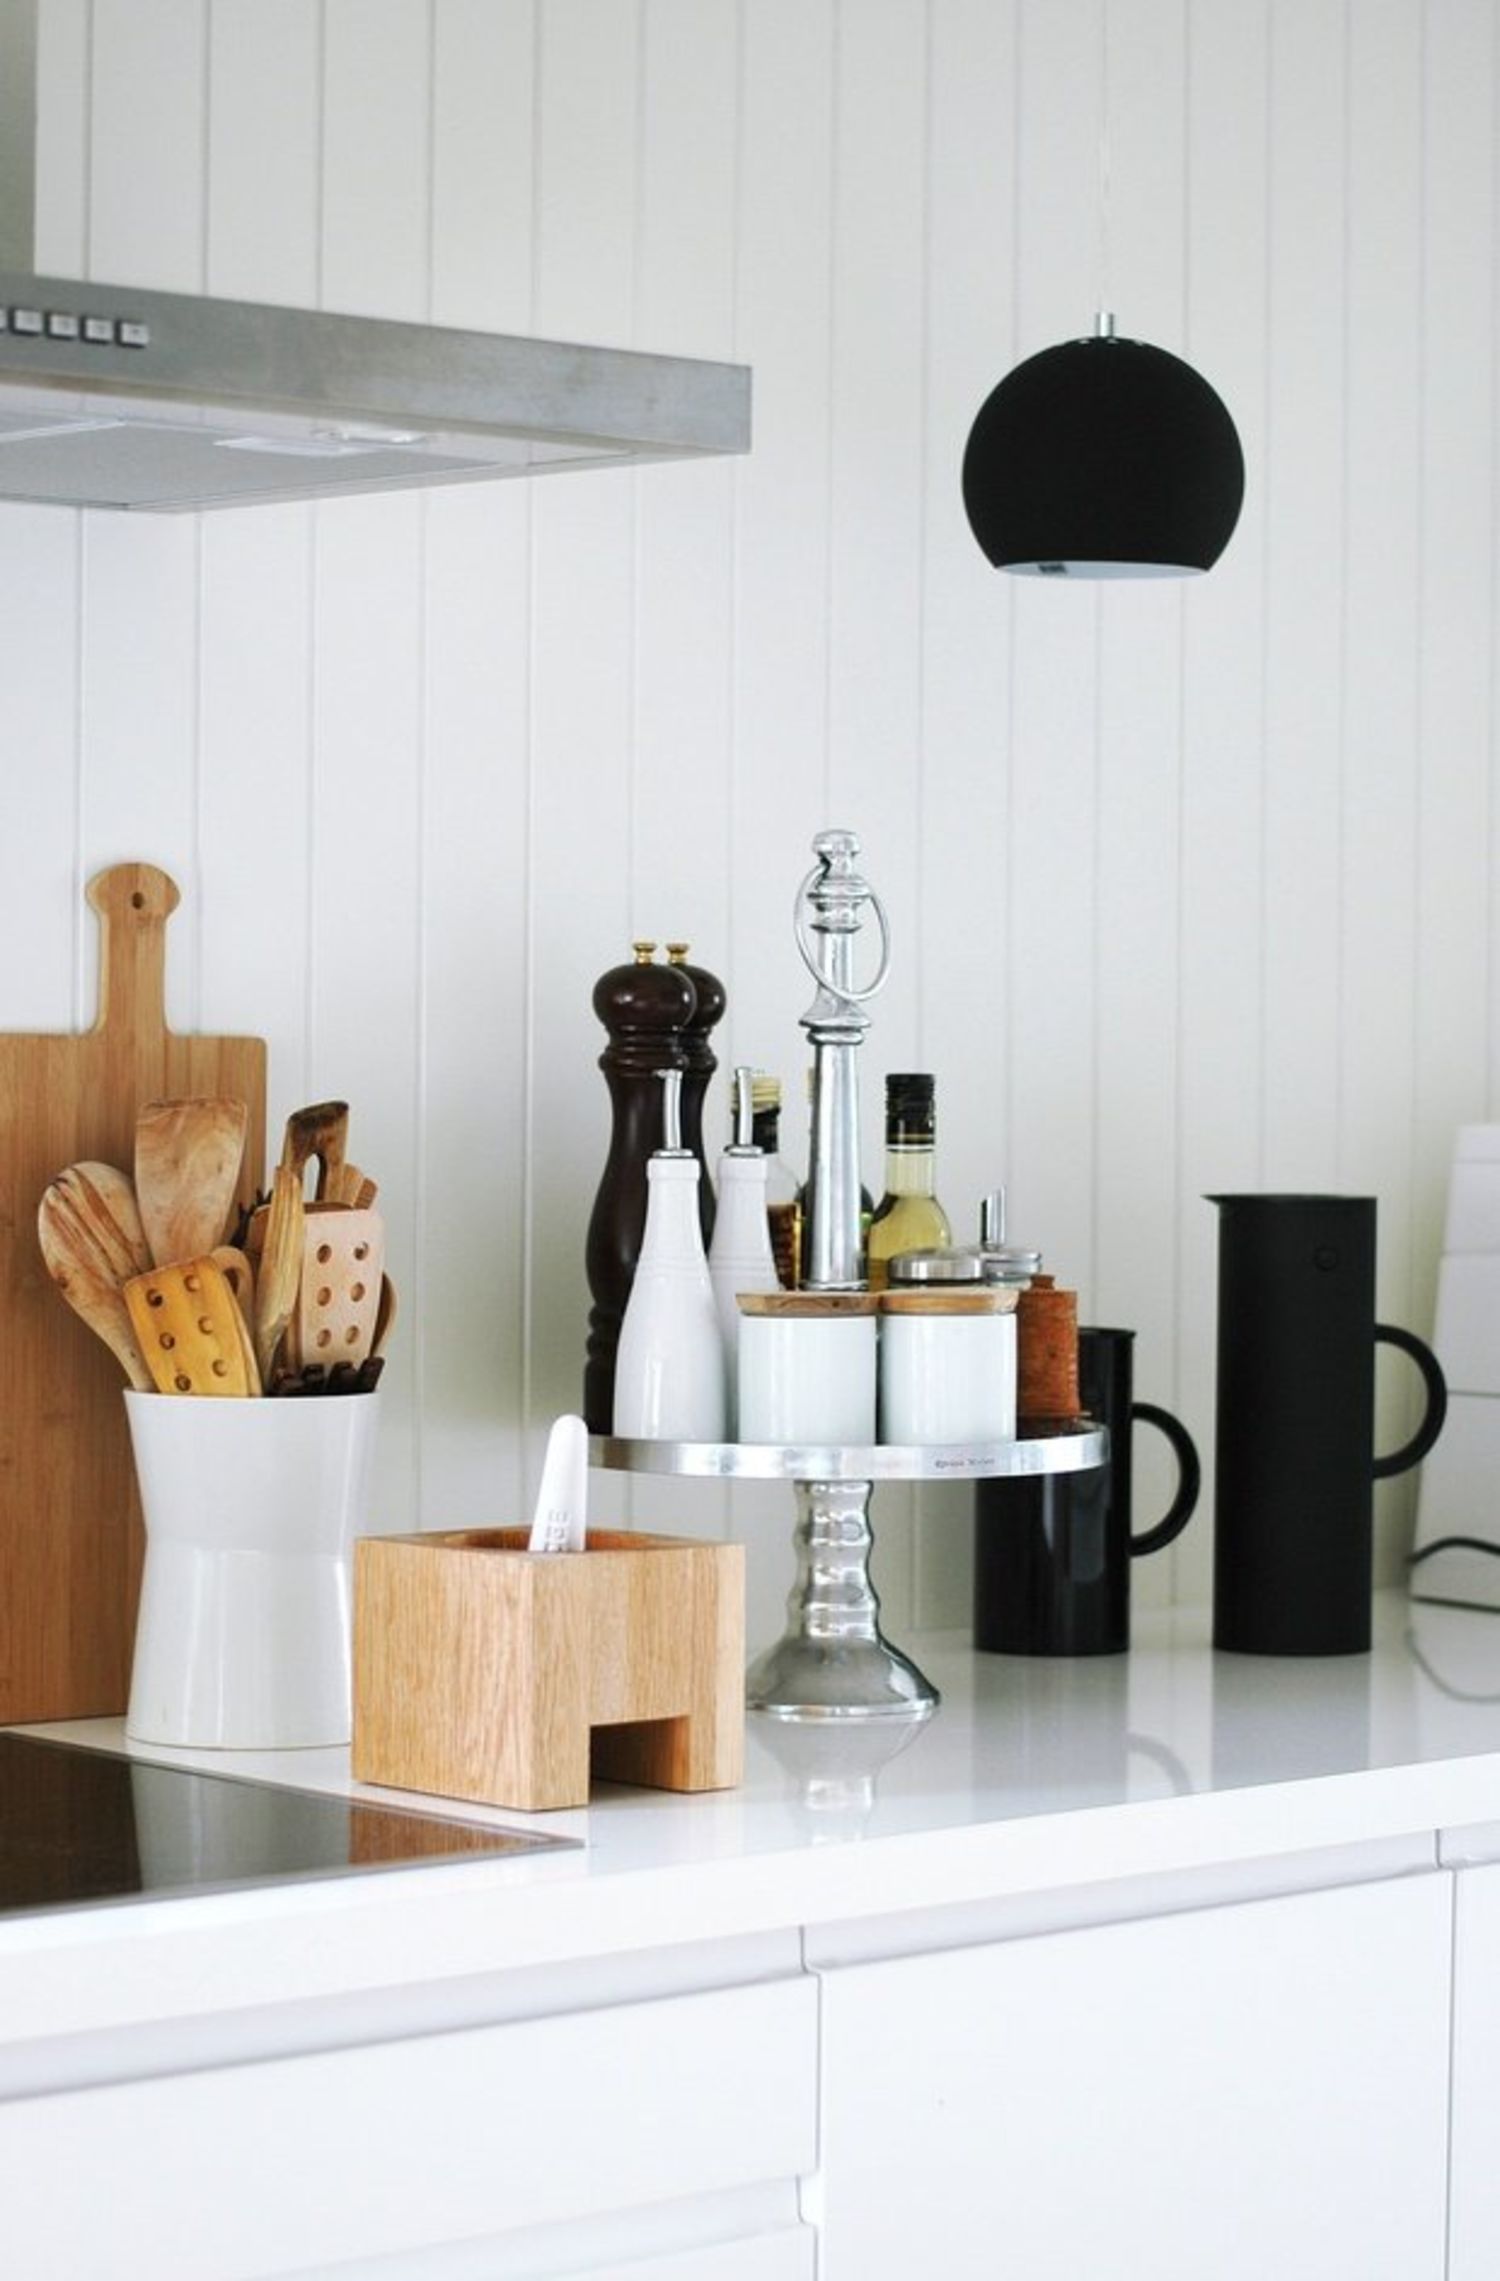 9 Clever Ways to Maximize Space: Small Kitchen Counter Organization Tips